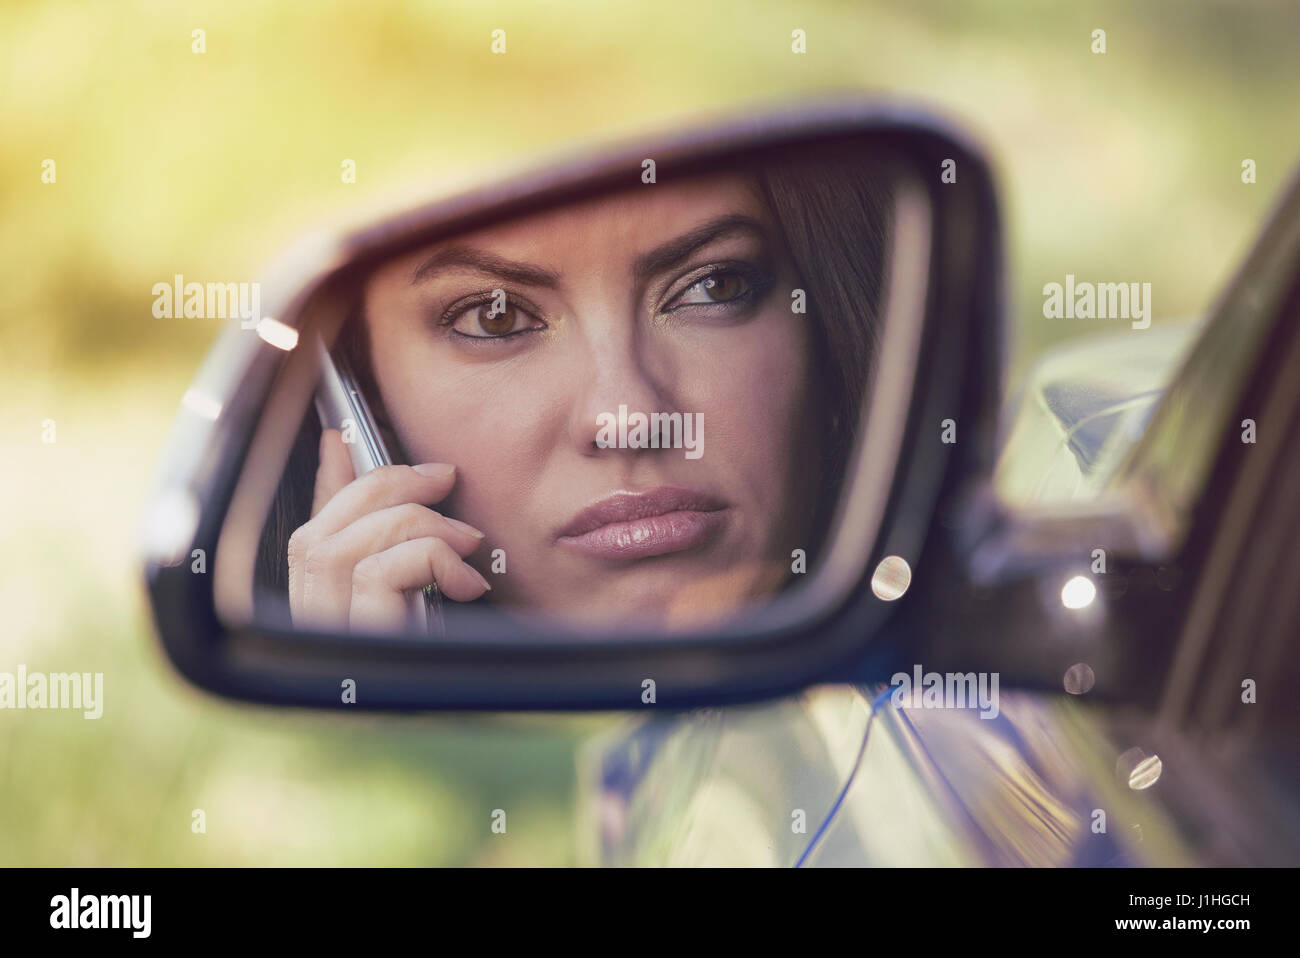 Young woman driving in car and talking on her phone, annoyed by conversation or bad voice message, outdoors background Stock Photo